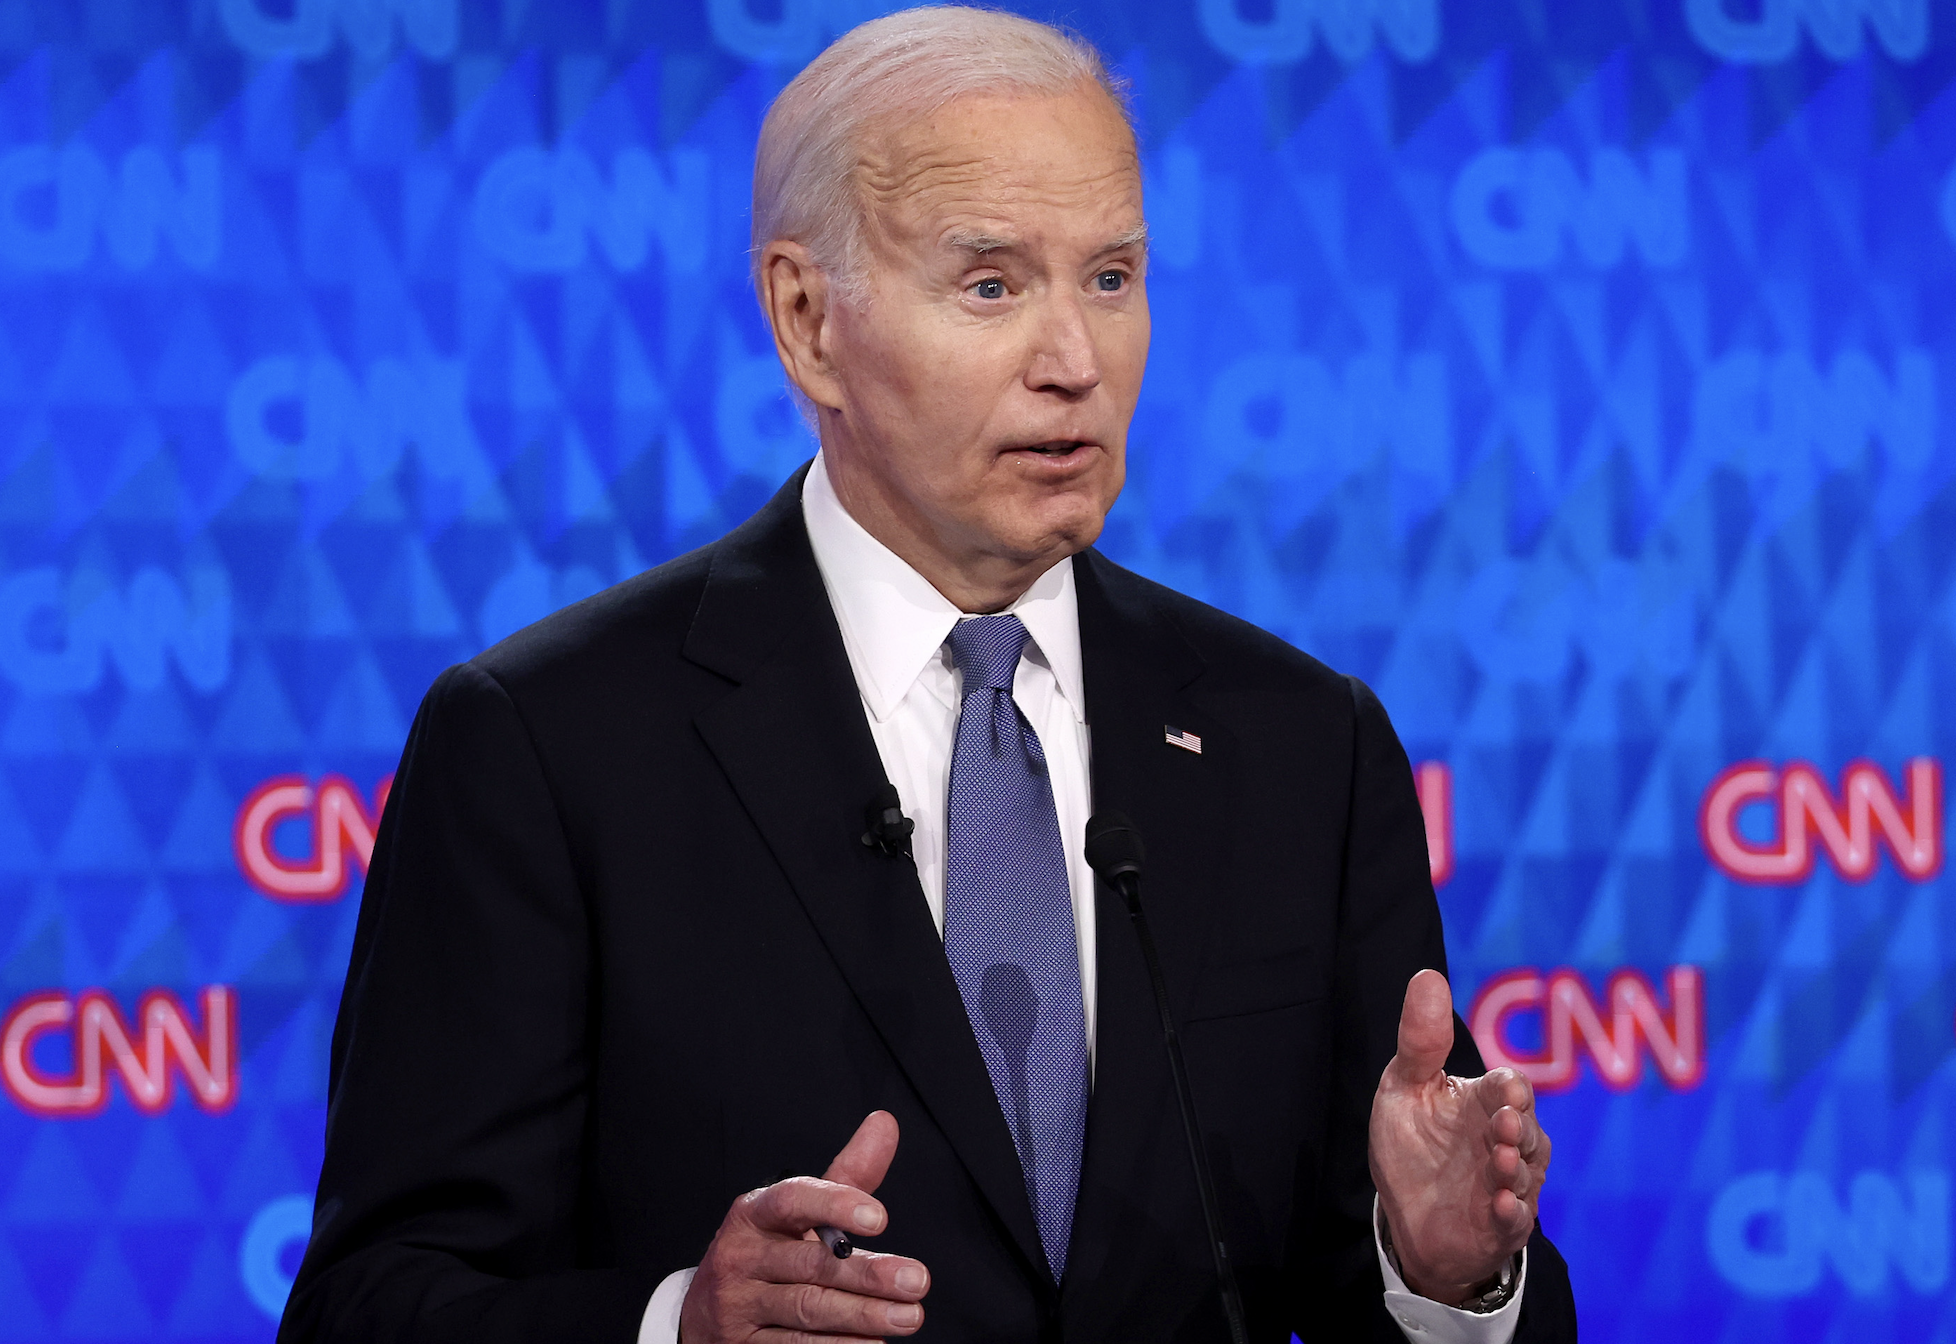 Joe Biden speaking during a CNN event, gesturing with his hands, wearing a suit and tie against a CNN-branded backdrop